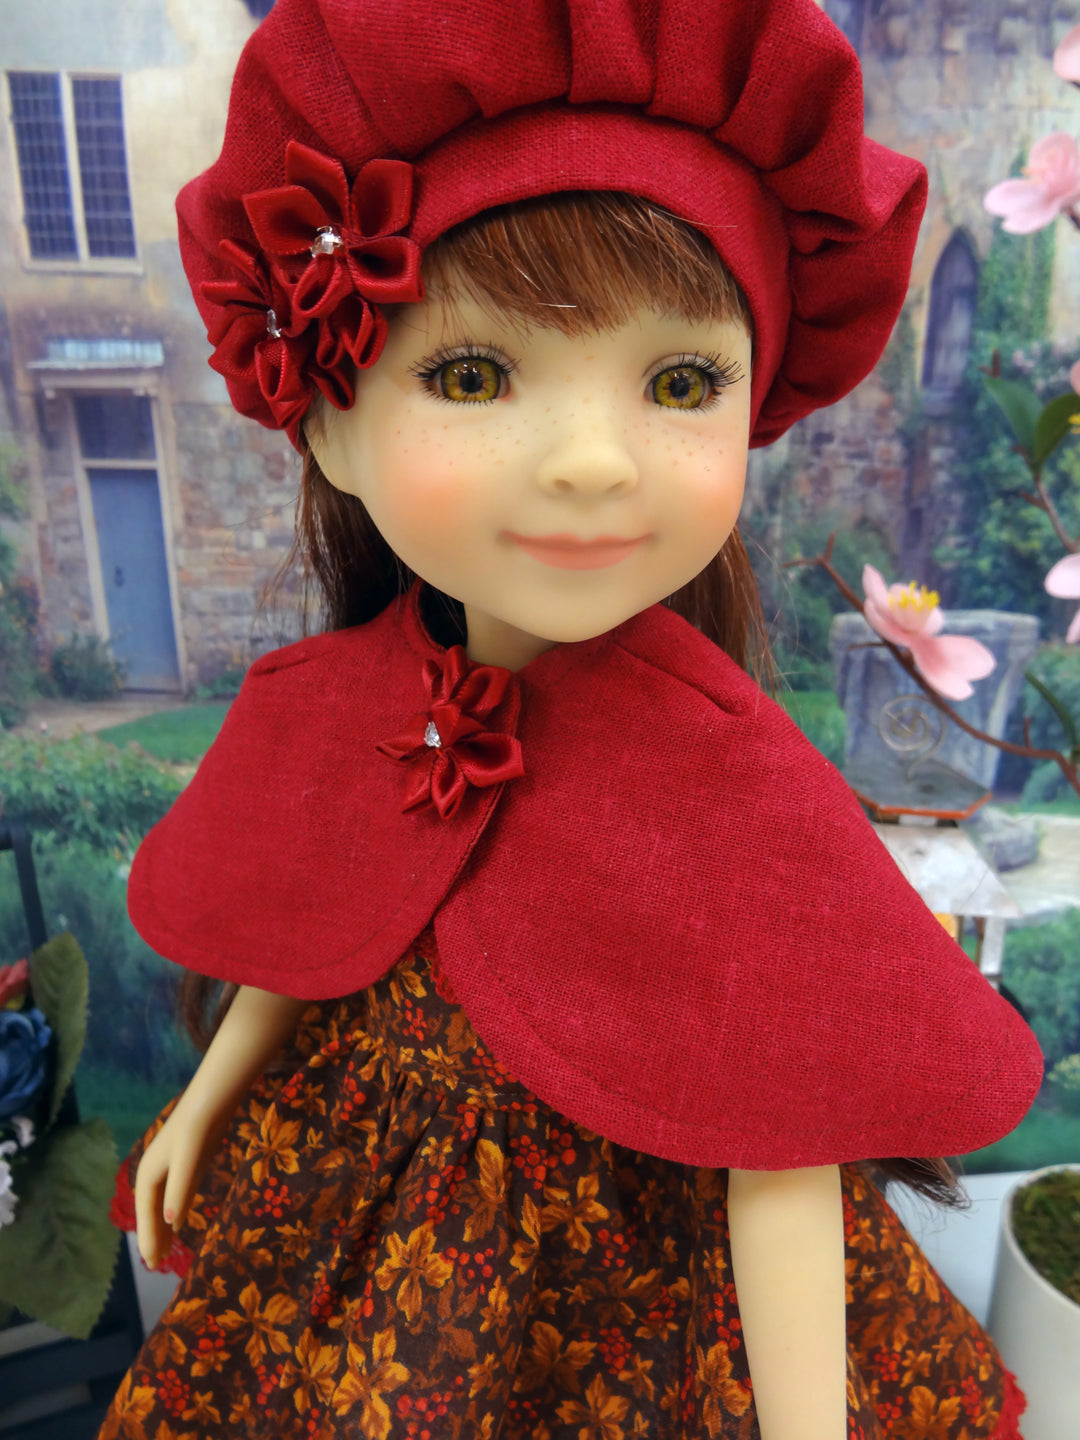 Fall Vineyard - dress & capelet with shoes for Ruby Red Fashion Friends doll